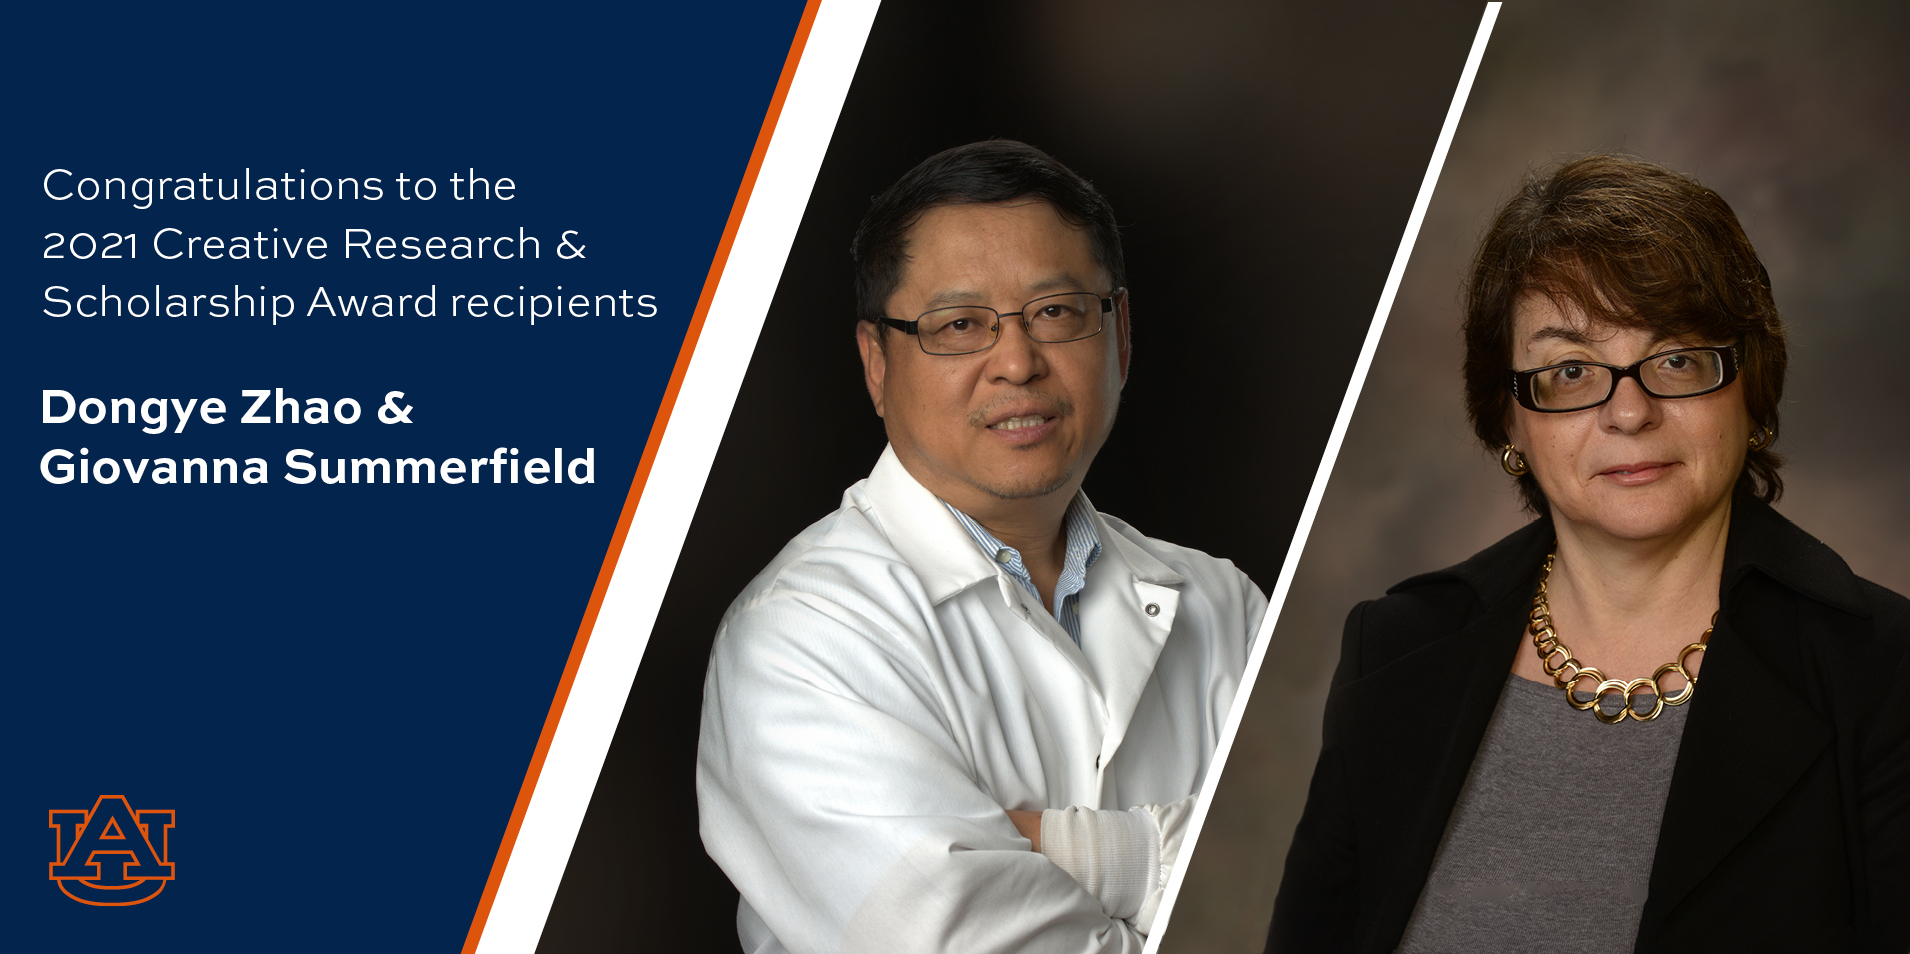 Congratulations to the 2021 Creative Research & Scholarship Award recipients, Dongye Zhao & Giovanna Summerfield (both pictured on orange and blue graphic with AU Auburn University logo)